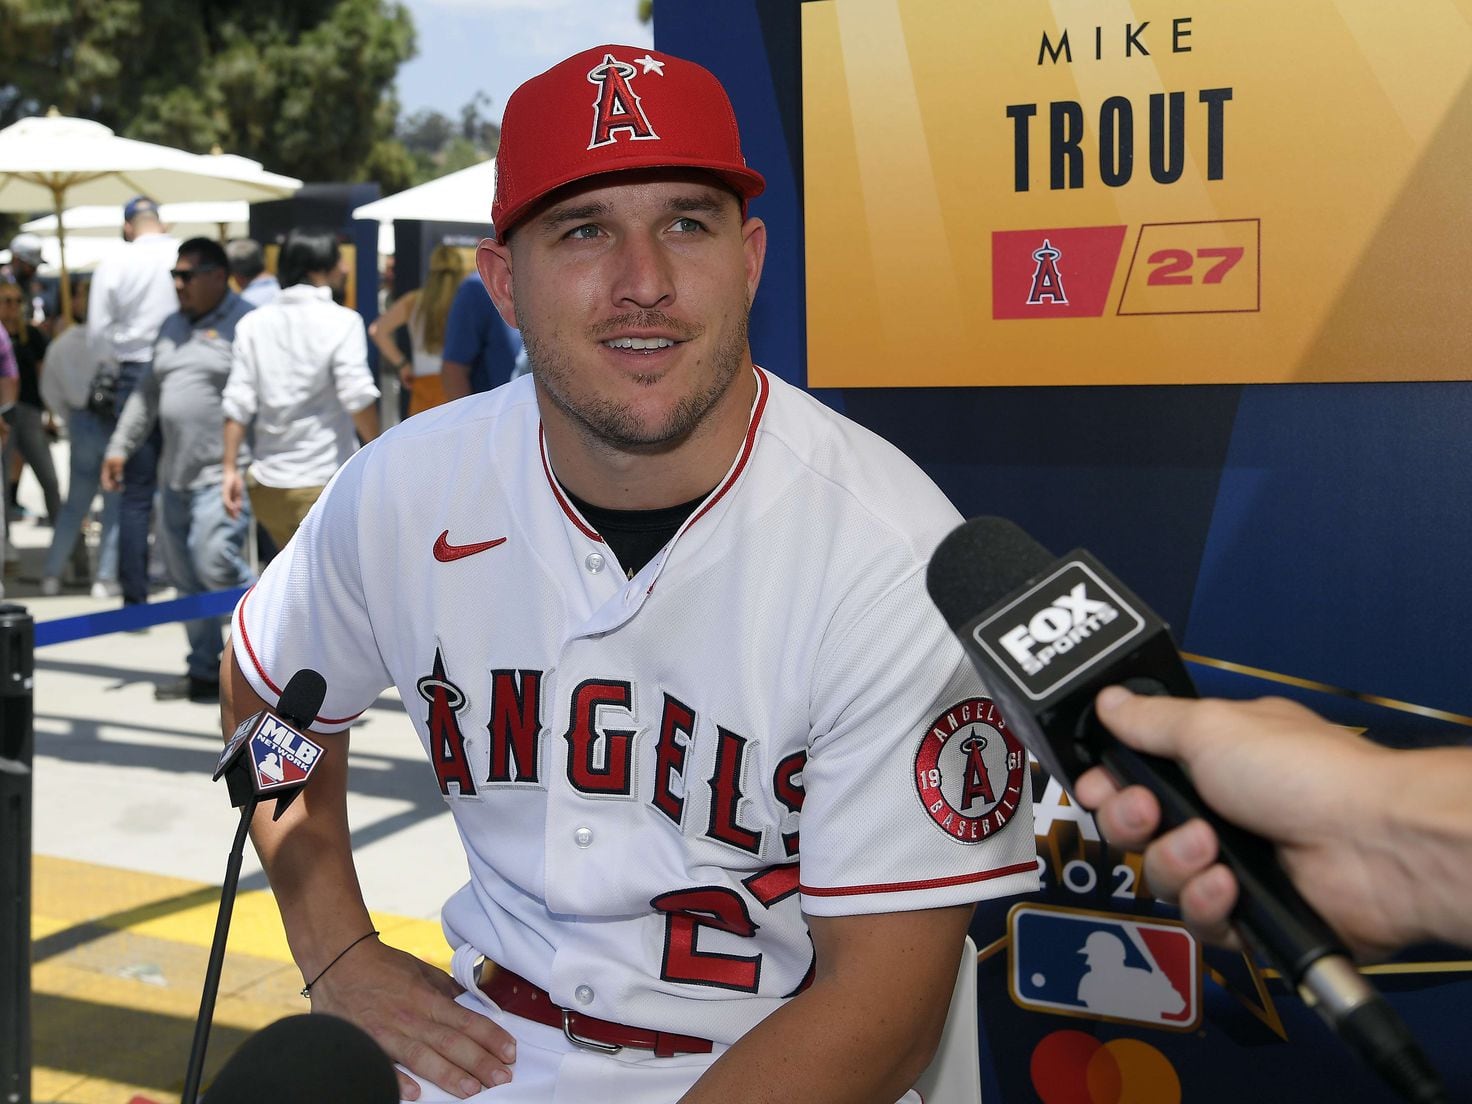 mike trout all star shirt